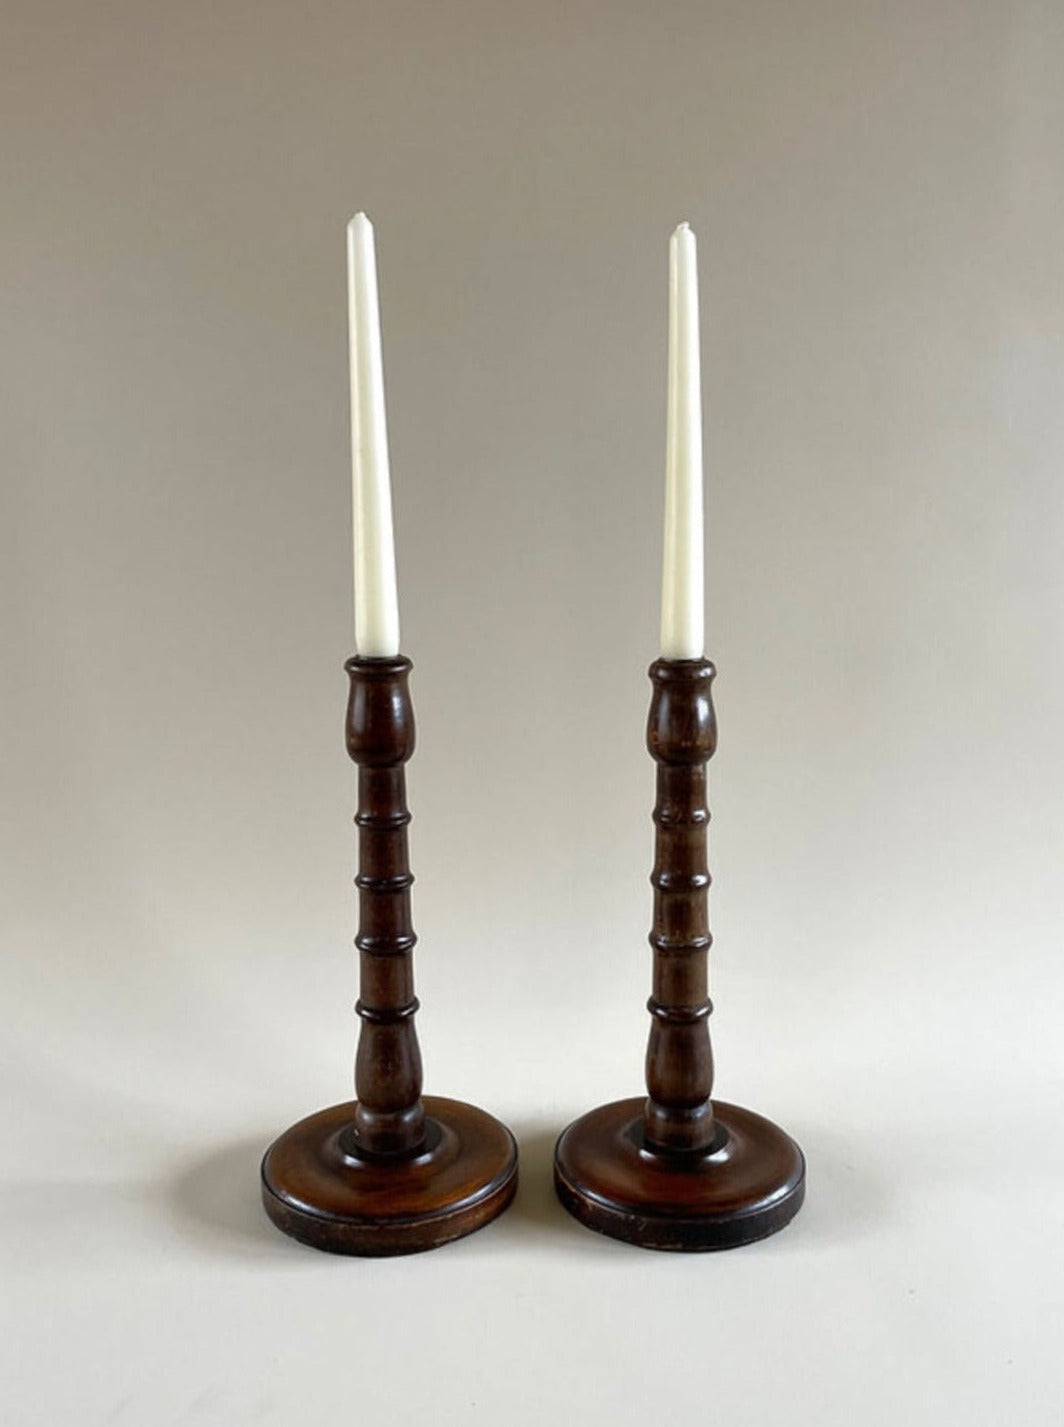 Pair of vintage turned wood candleholders with intricate carved details